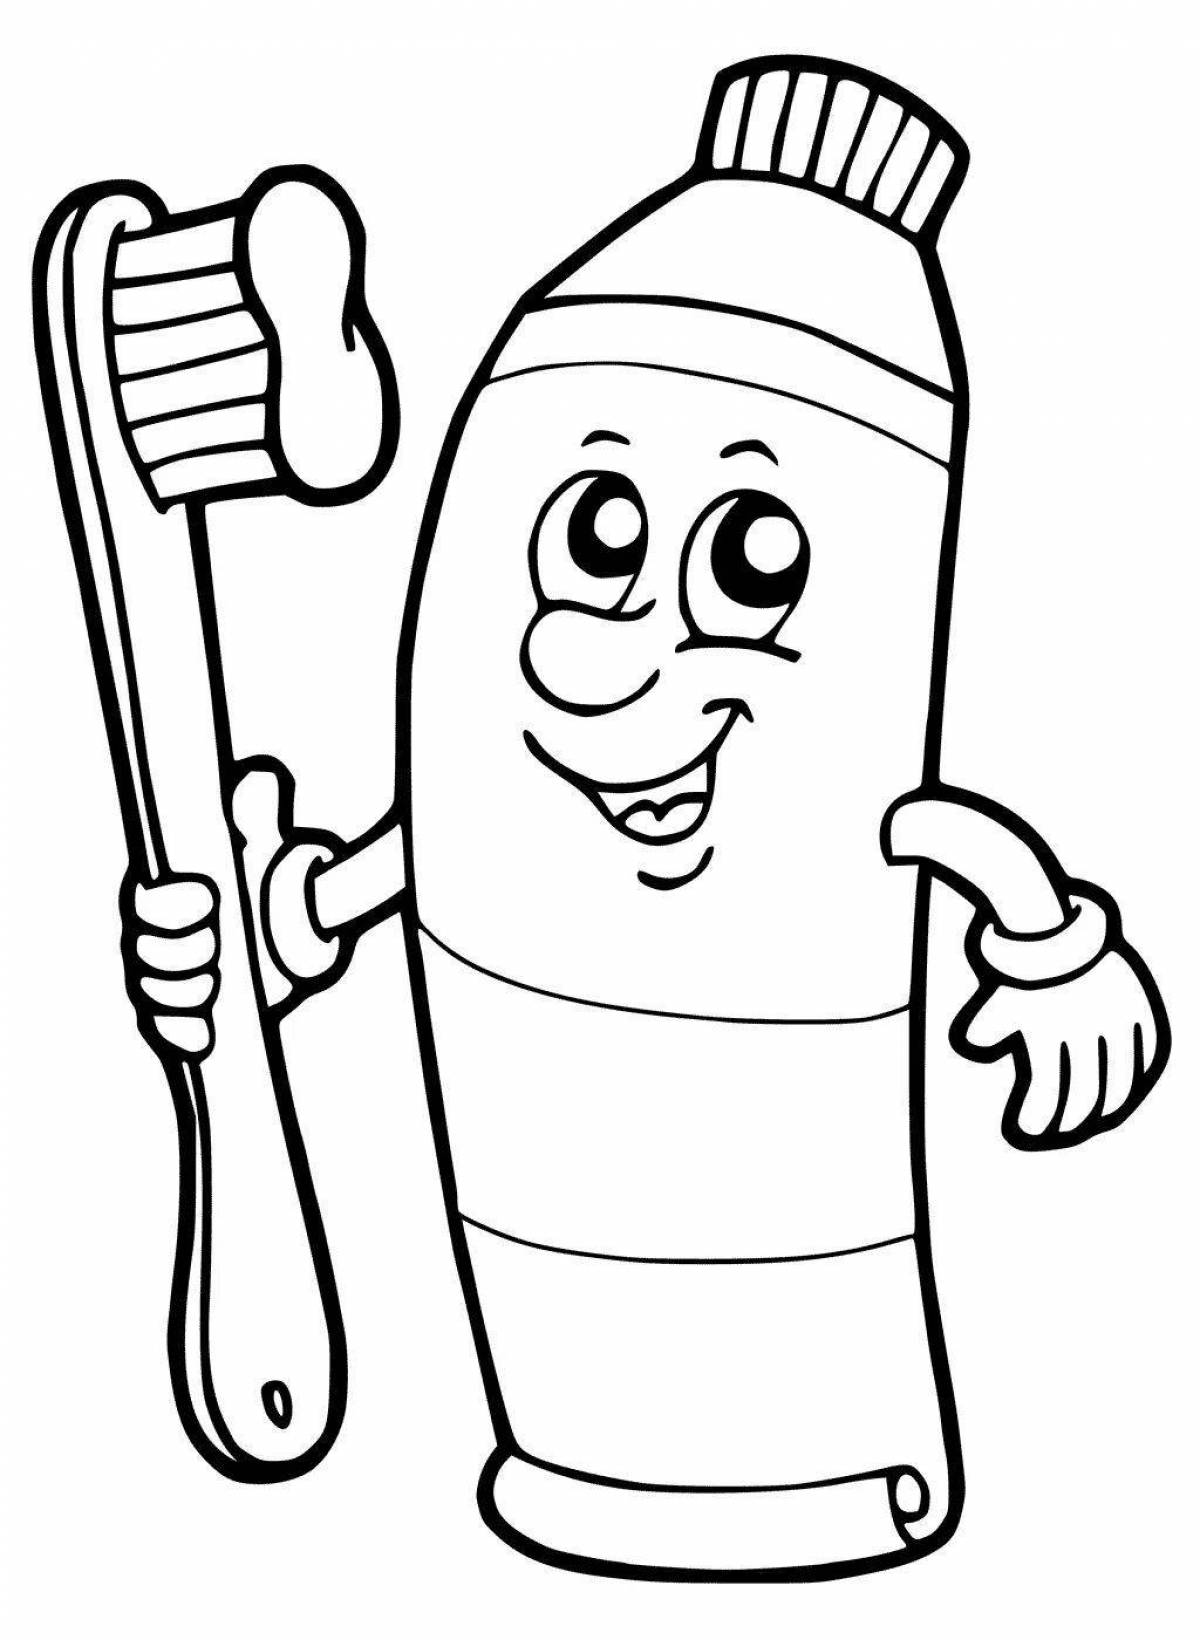 Vivacious coloring page toothpaste for children